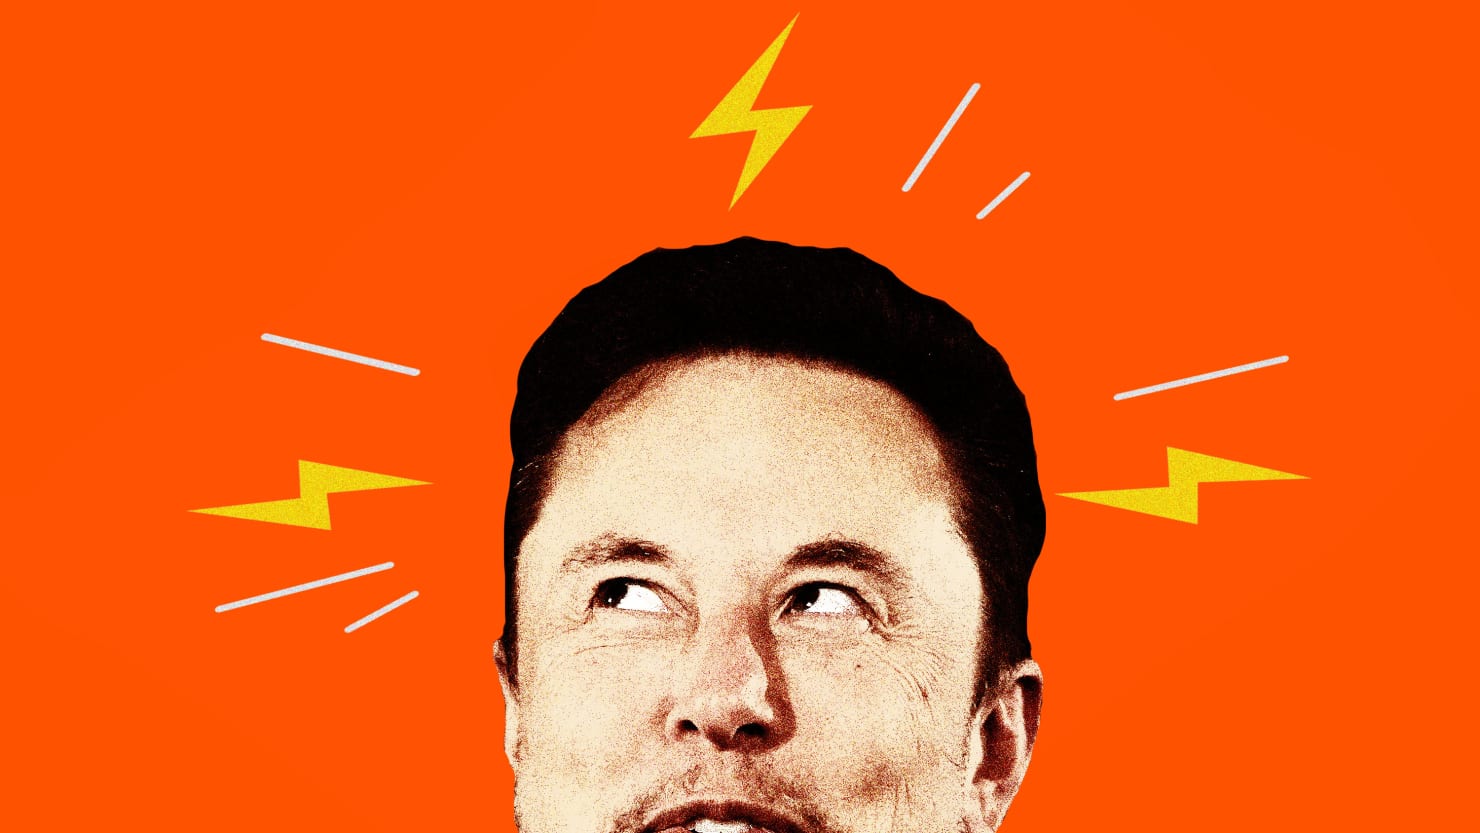 Elon Musk Wants You to Use Neuralink to Lose Weight. That’s a Bad Idea.